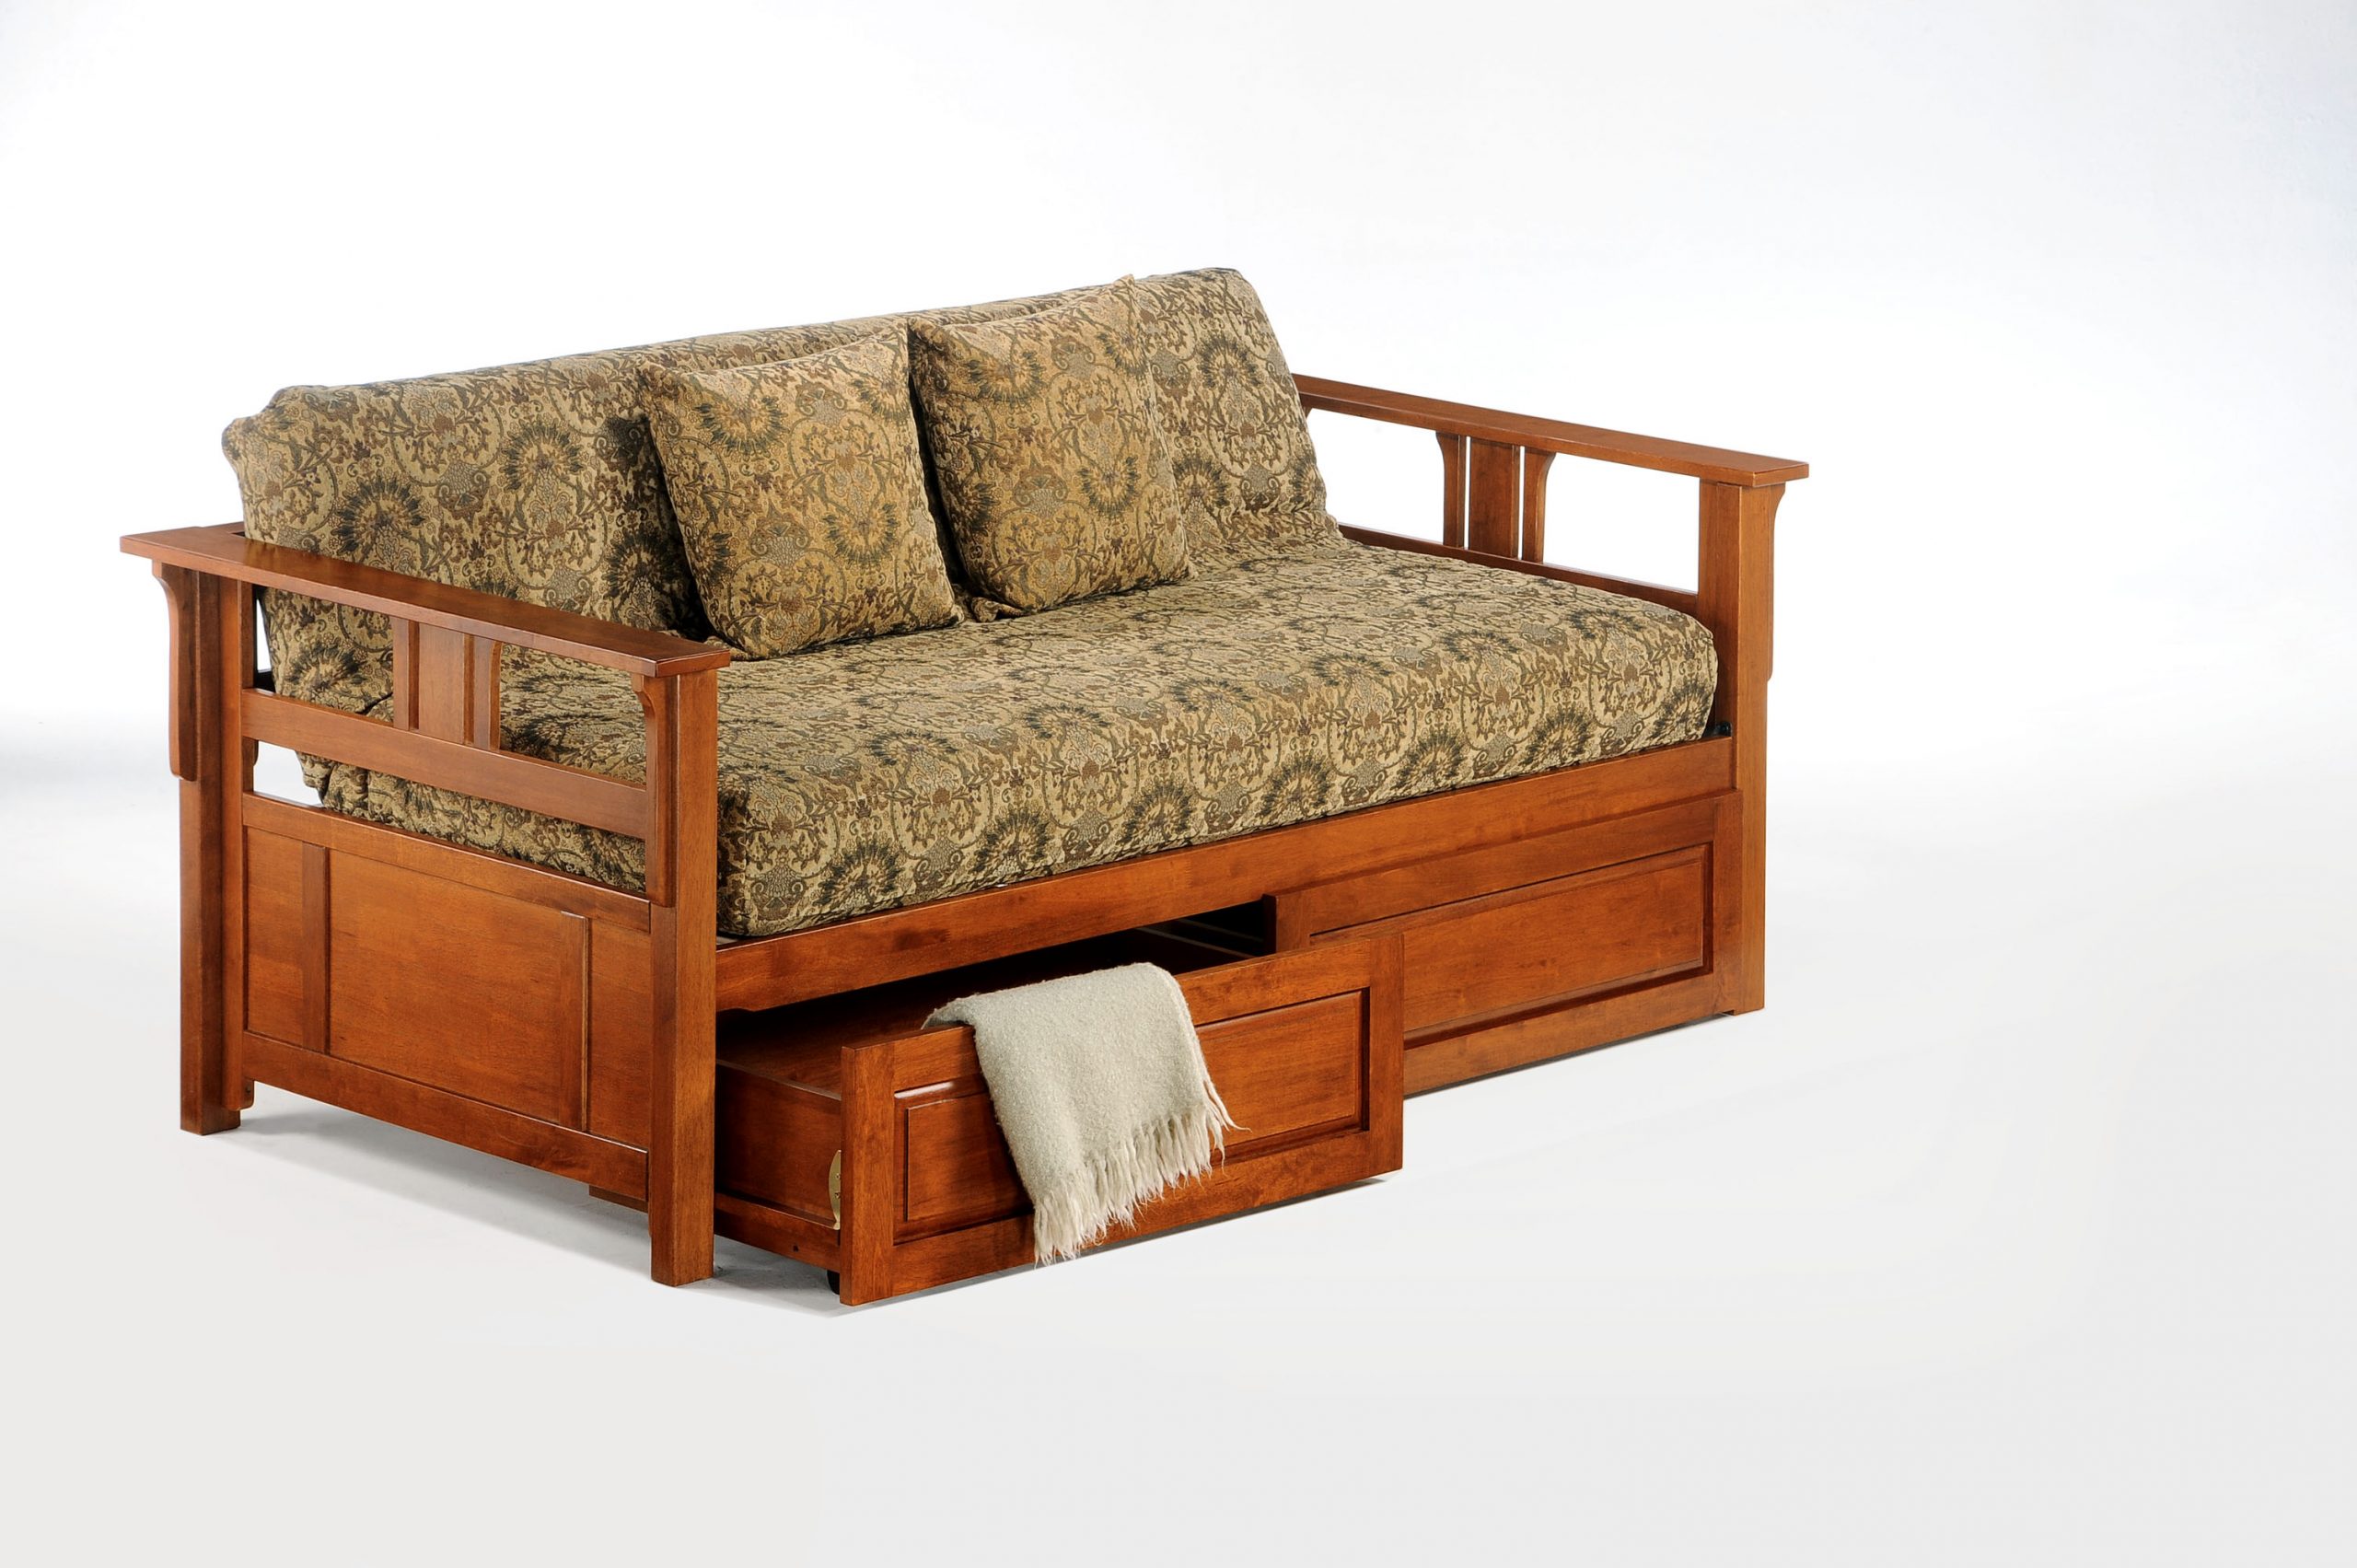 Teddy R Daybed Cherry w Drawers opened